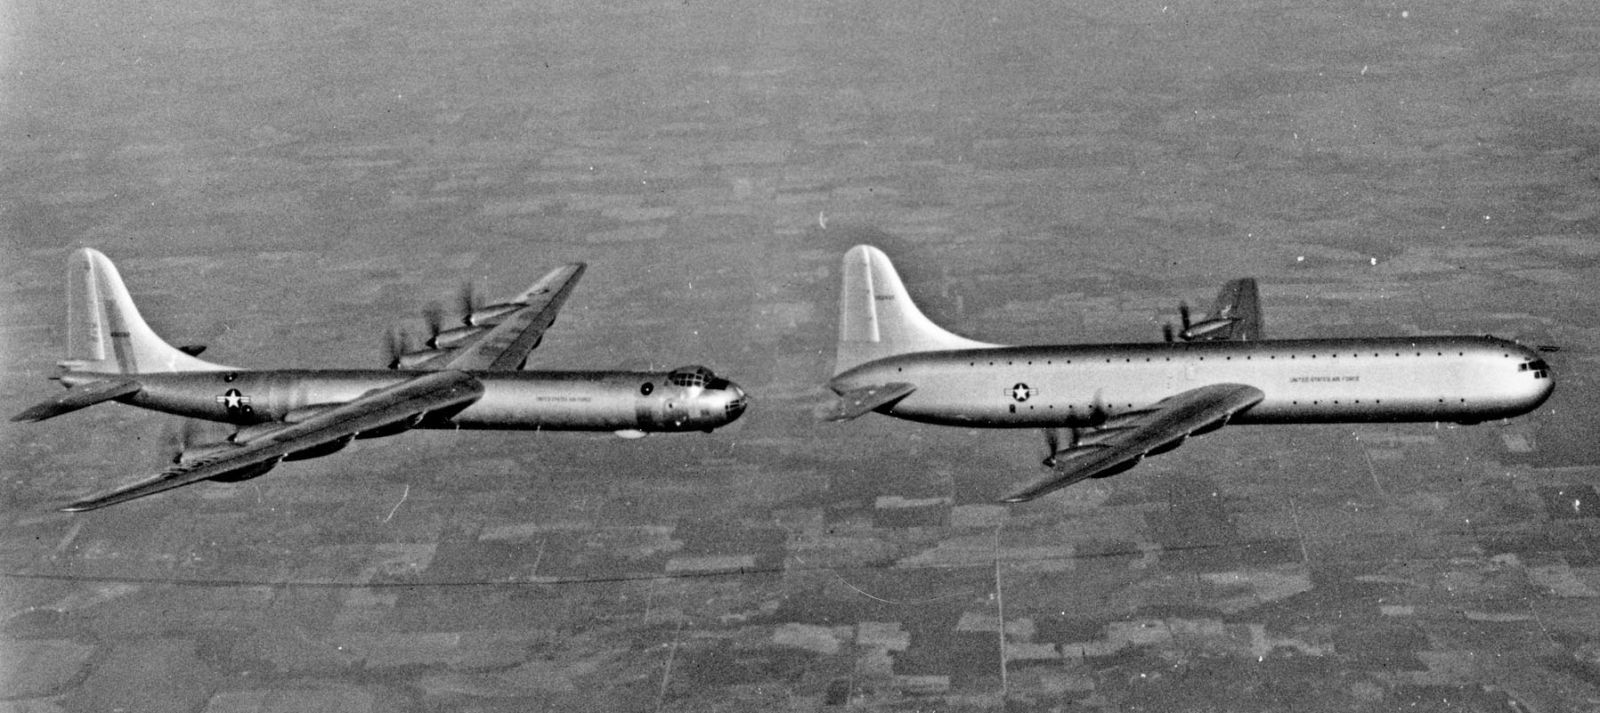 A B-36 and the cargo carrying variant XC-99 in flight. Only a single XC-99 was built. (US Air Force)